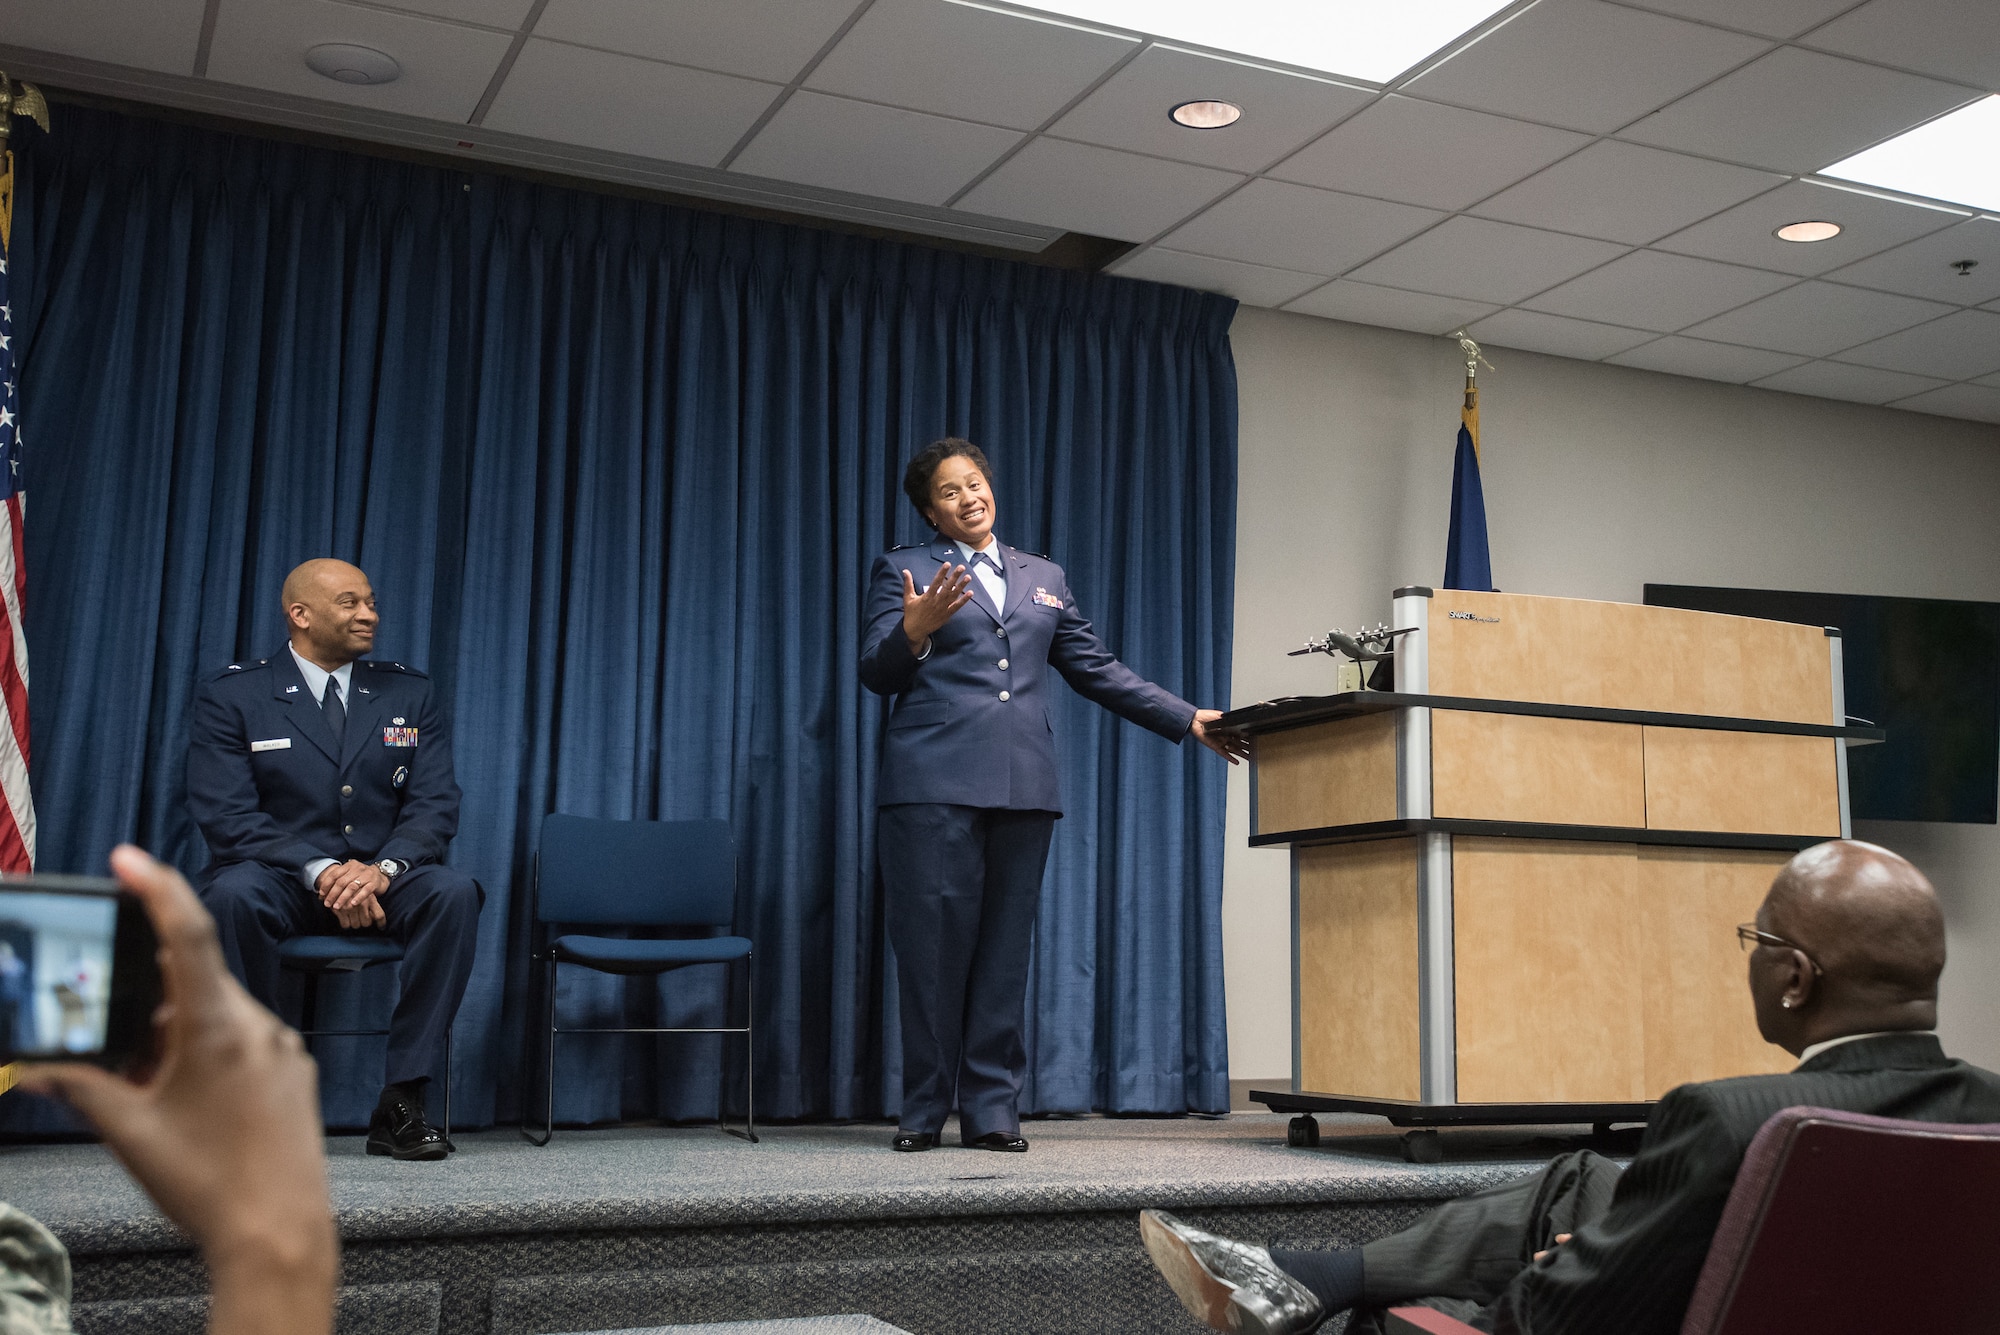 Newly promoted Col. Joyce Gordon, state judge advocate for Headquarters, Kentucky Air National Guard, speaks to the audience during her promotion ceremony at the Kentucky Air National Guard Base in Louisville, Ky., April 14, 2018.